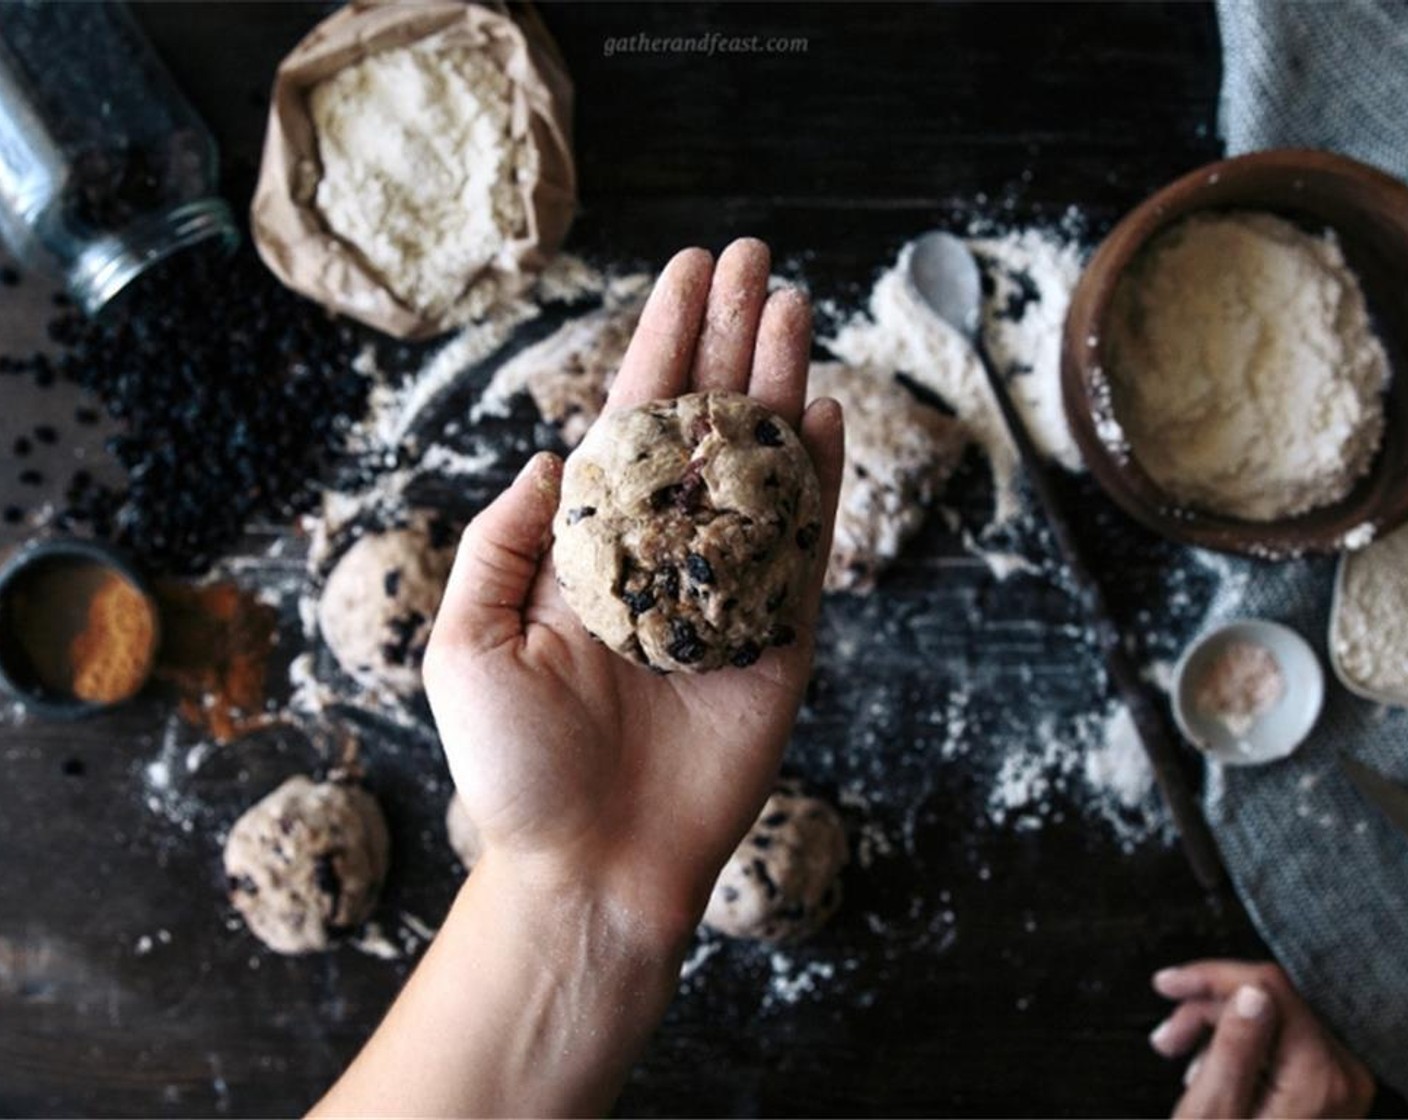 step 4 If you're making buns, cut dough into 8 even pieces, and roll into balls. Place on a paper-lined tray, cover with a clean tea towel, and set aside to rise for 1-2 hours. While dough is rising, preheat oven to 480 degrees F (250 degrees C).